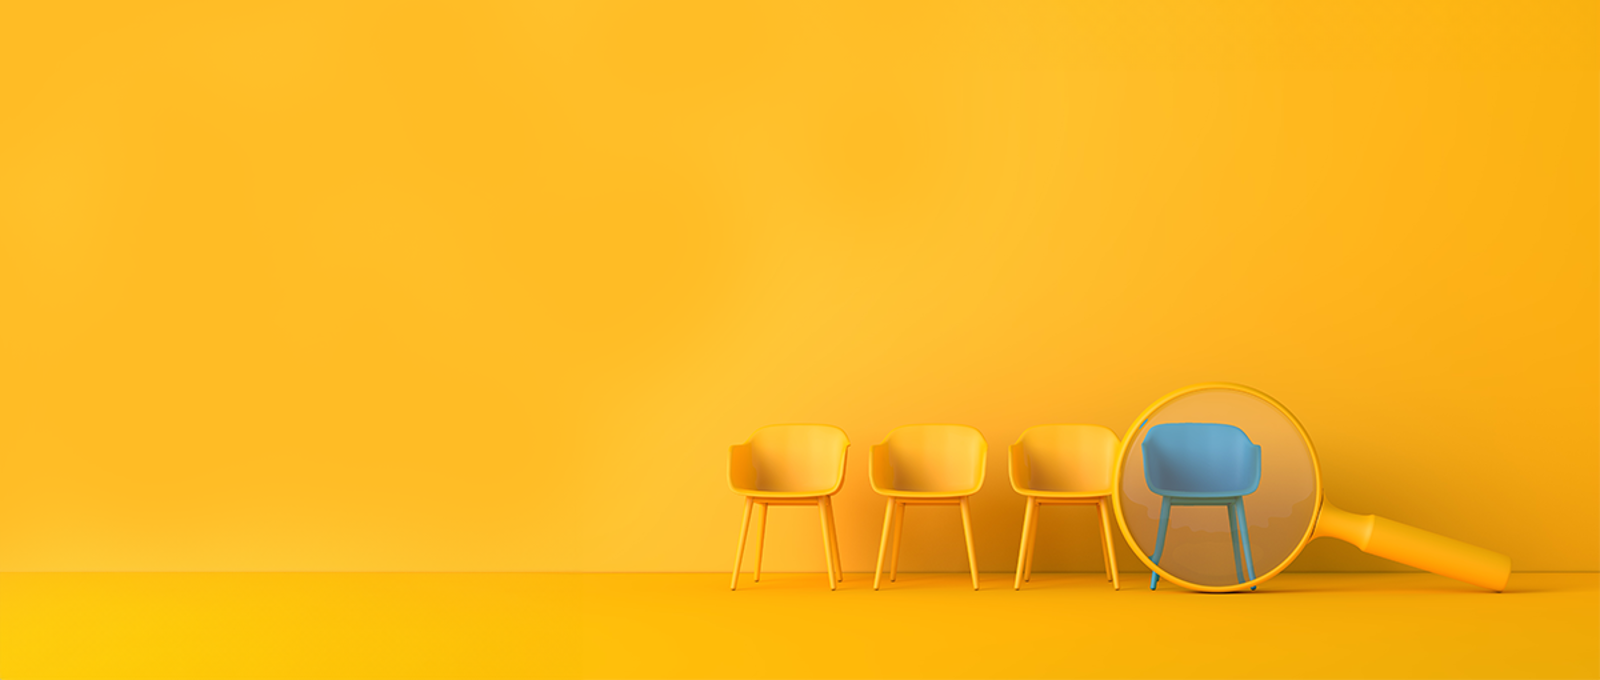 Job search, yellow chairs with a magnifying glass over a blue chair